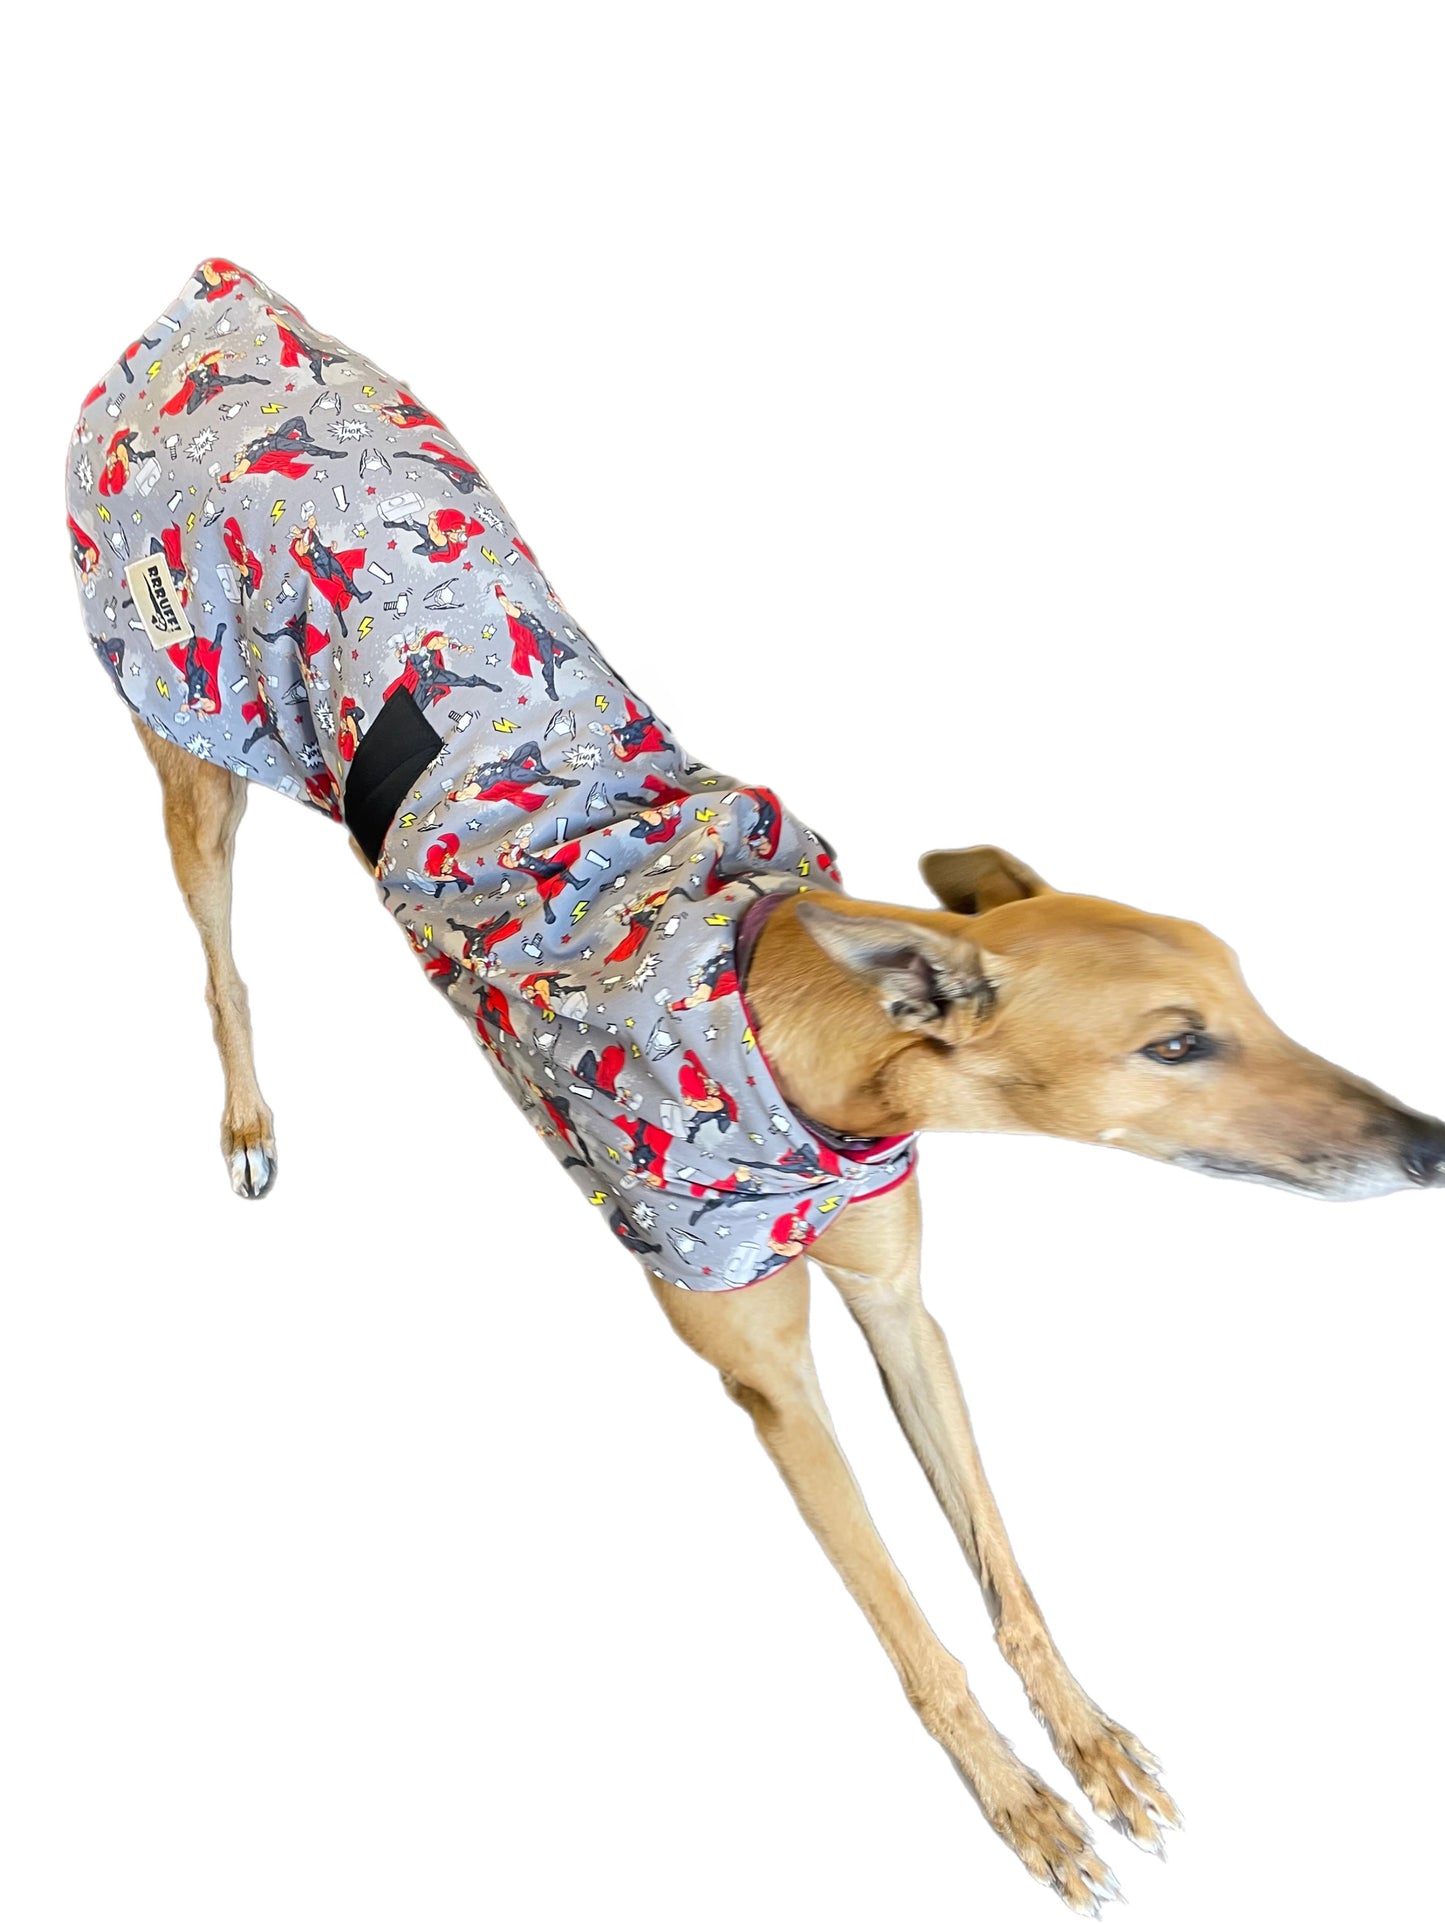 Thor Spring classic style Greyhound coat design in a sturdy cotton & lush fleece washable